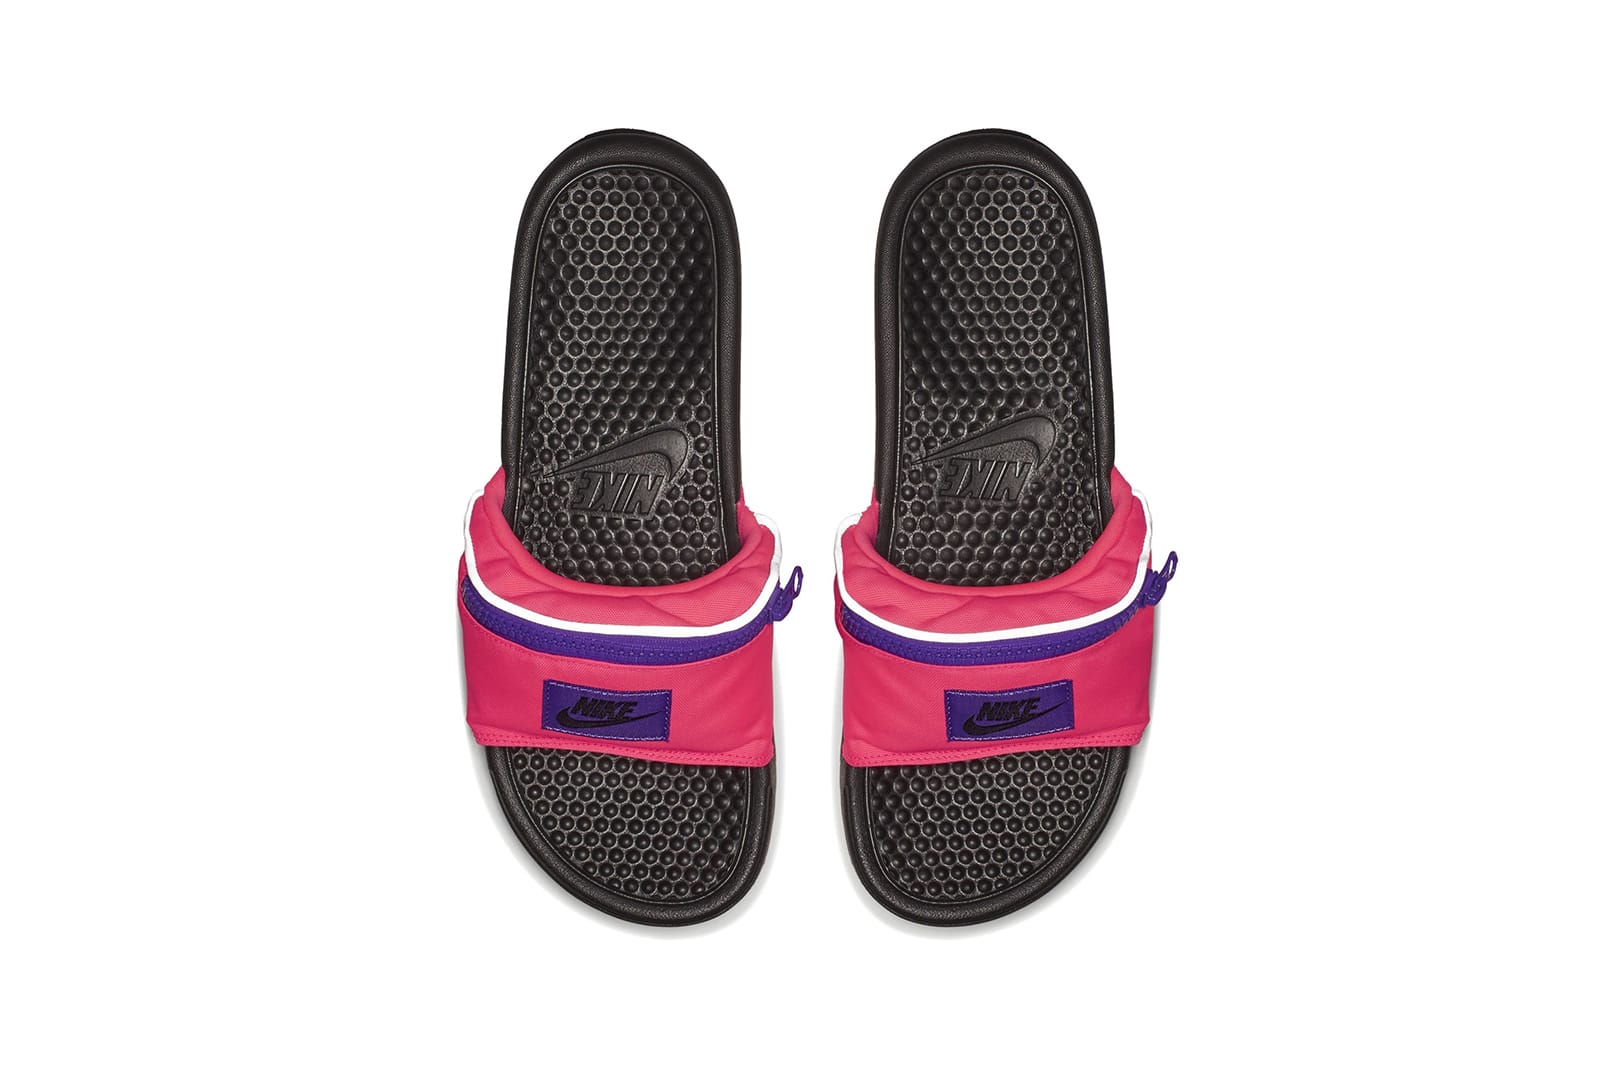 nike slippers fanny pack